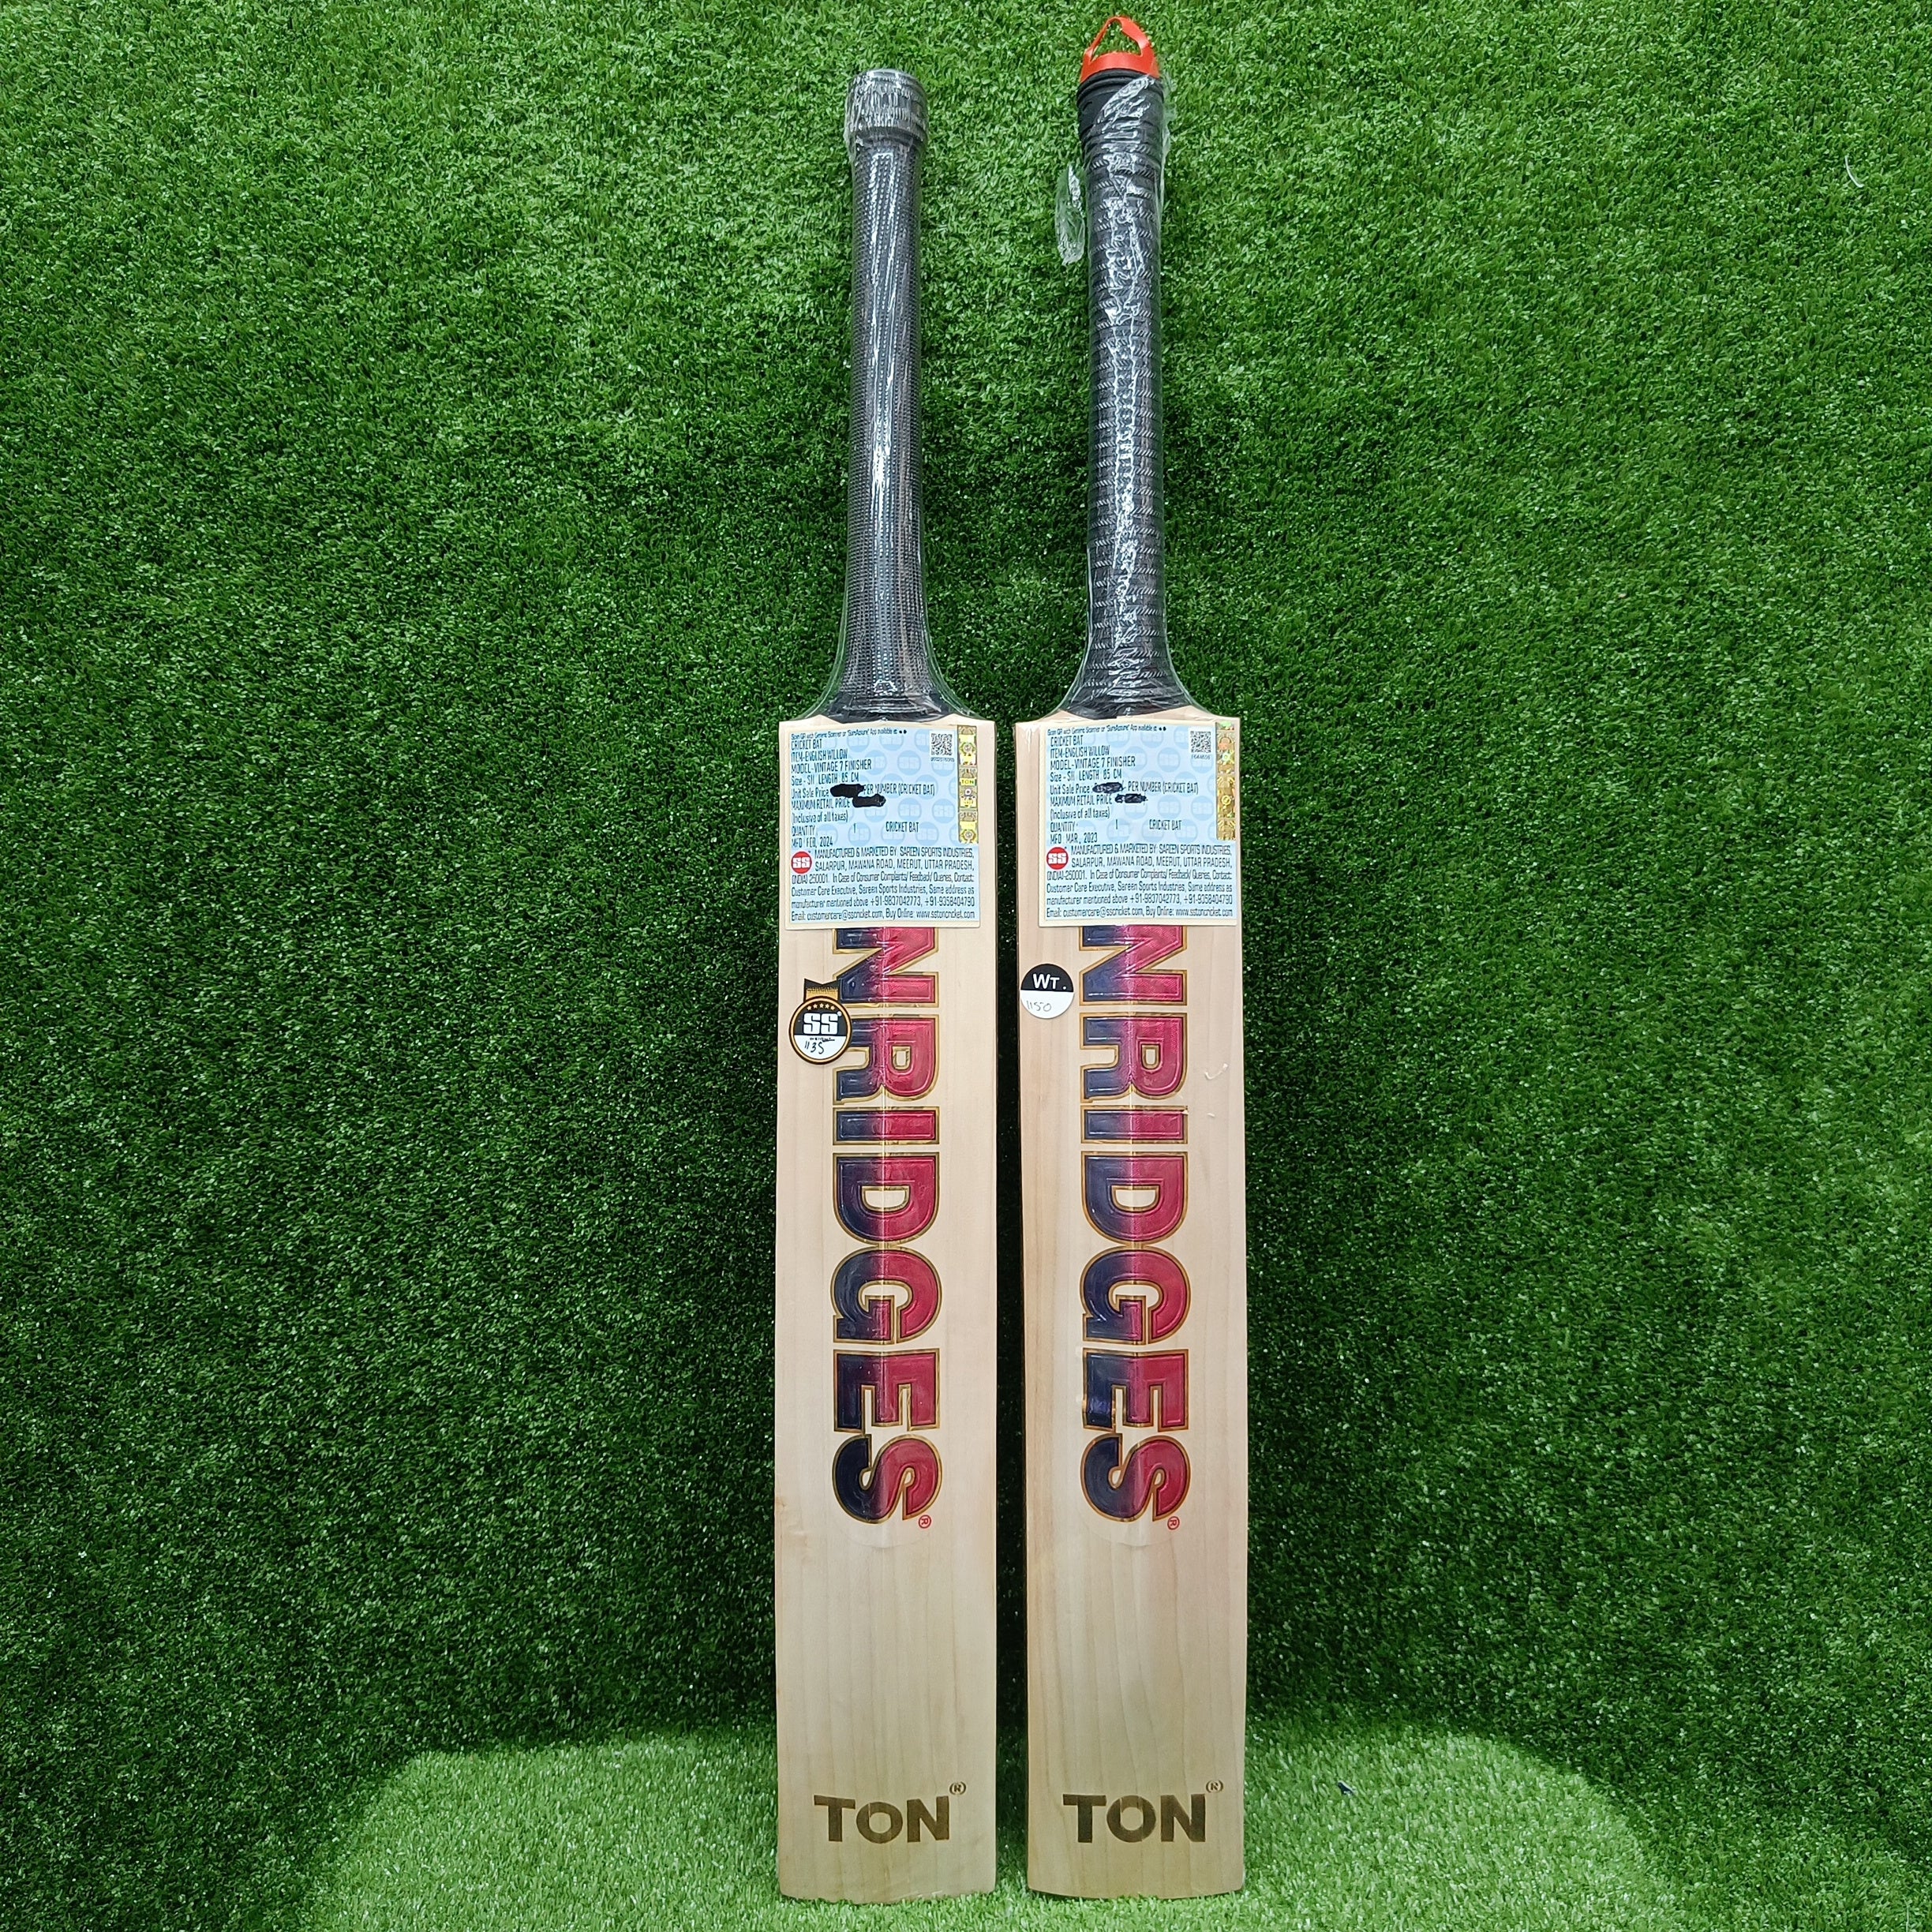 SS Vintage Finisher 7 English Willow Cricket Bat